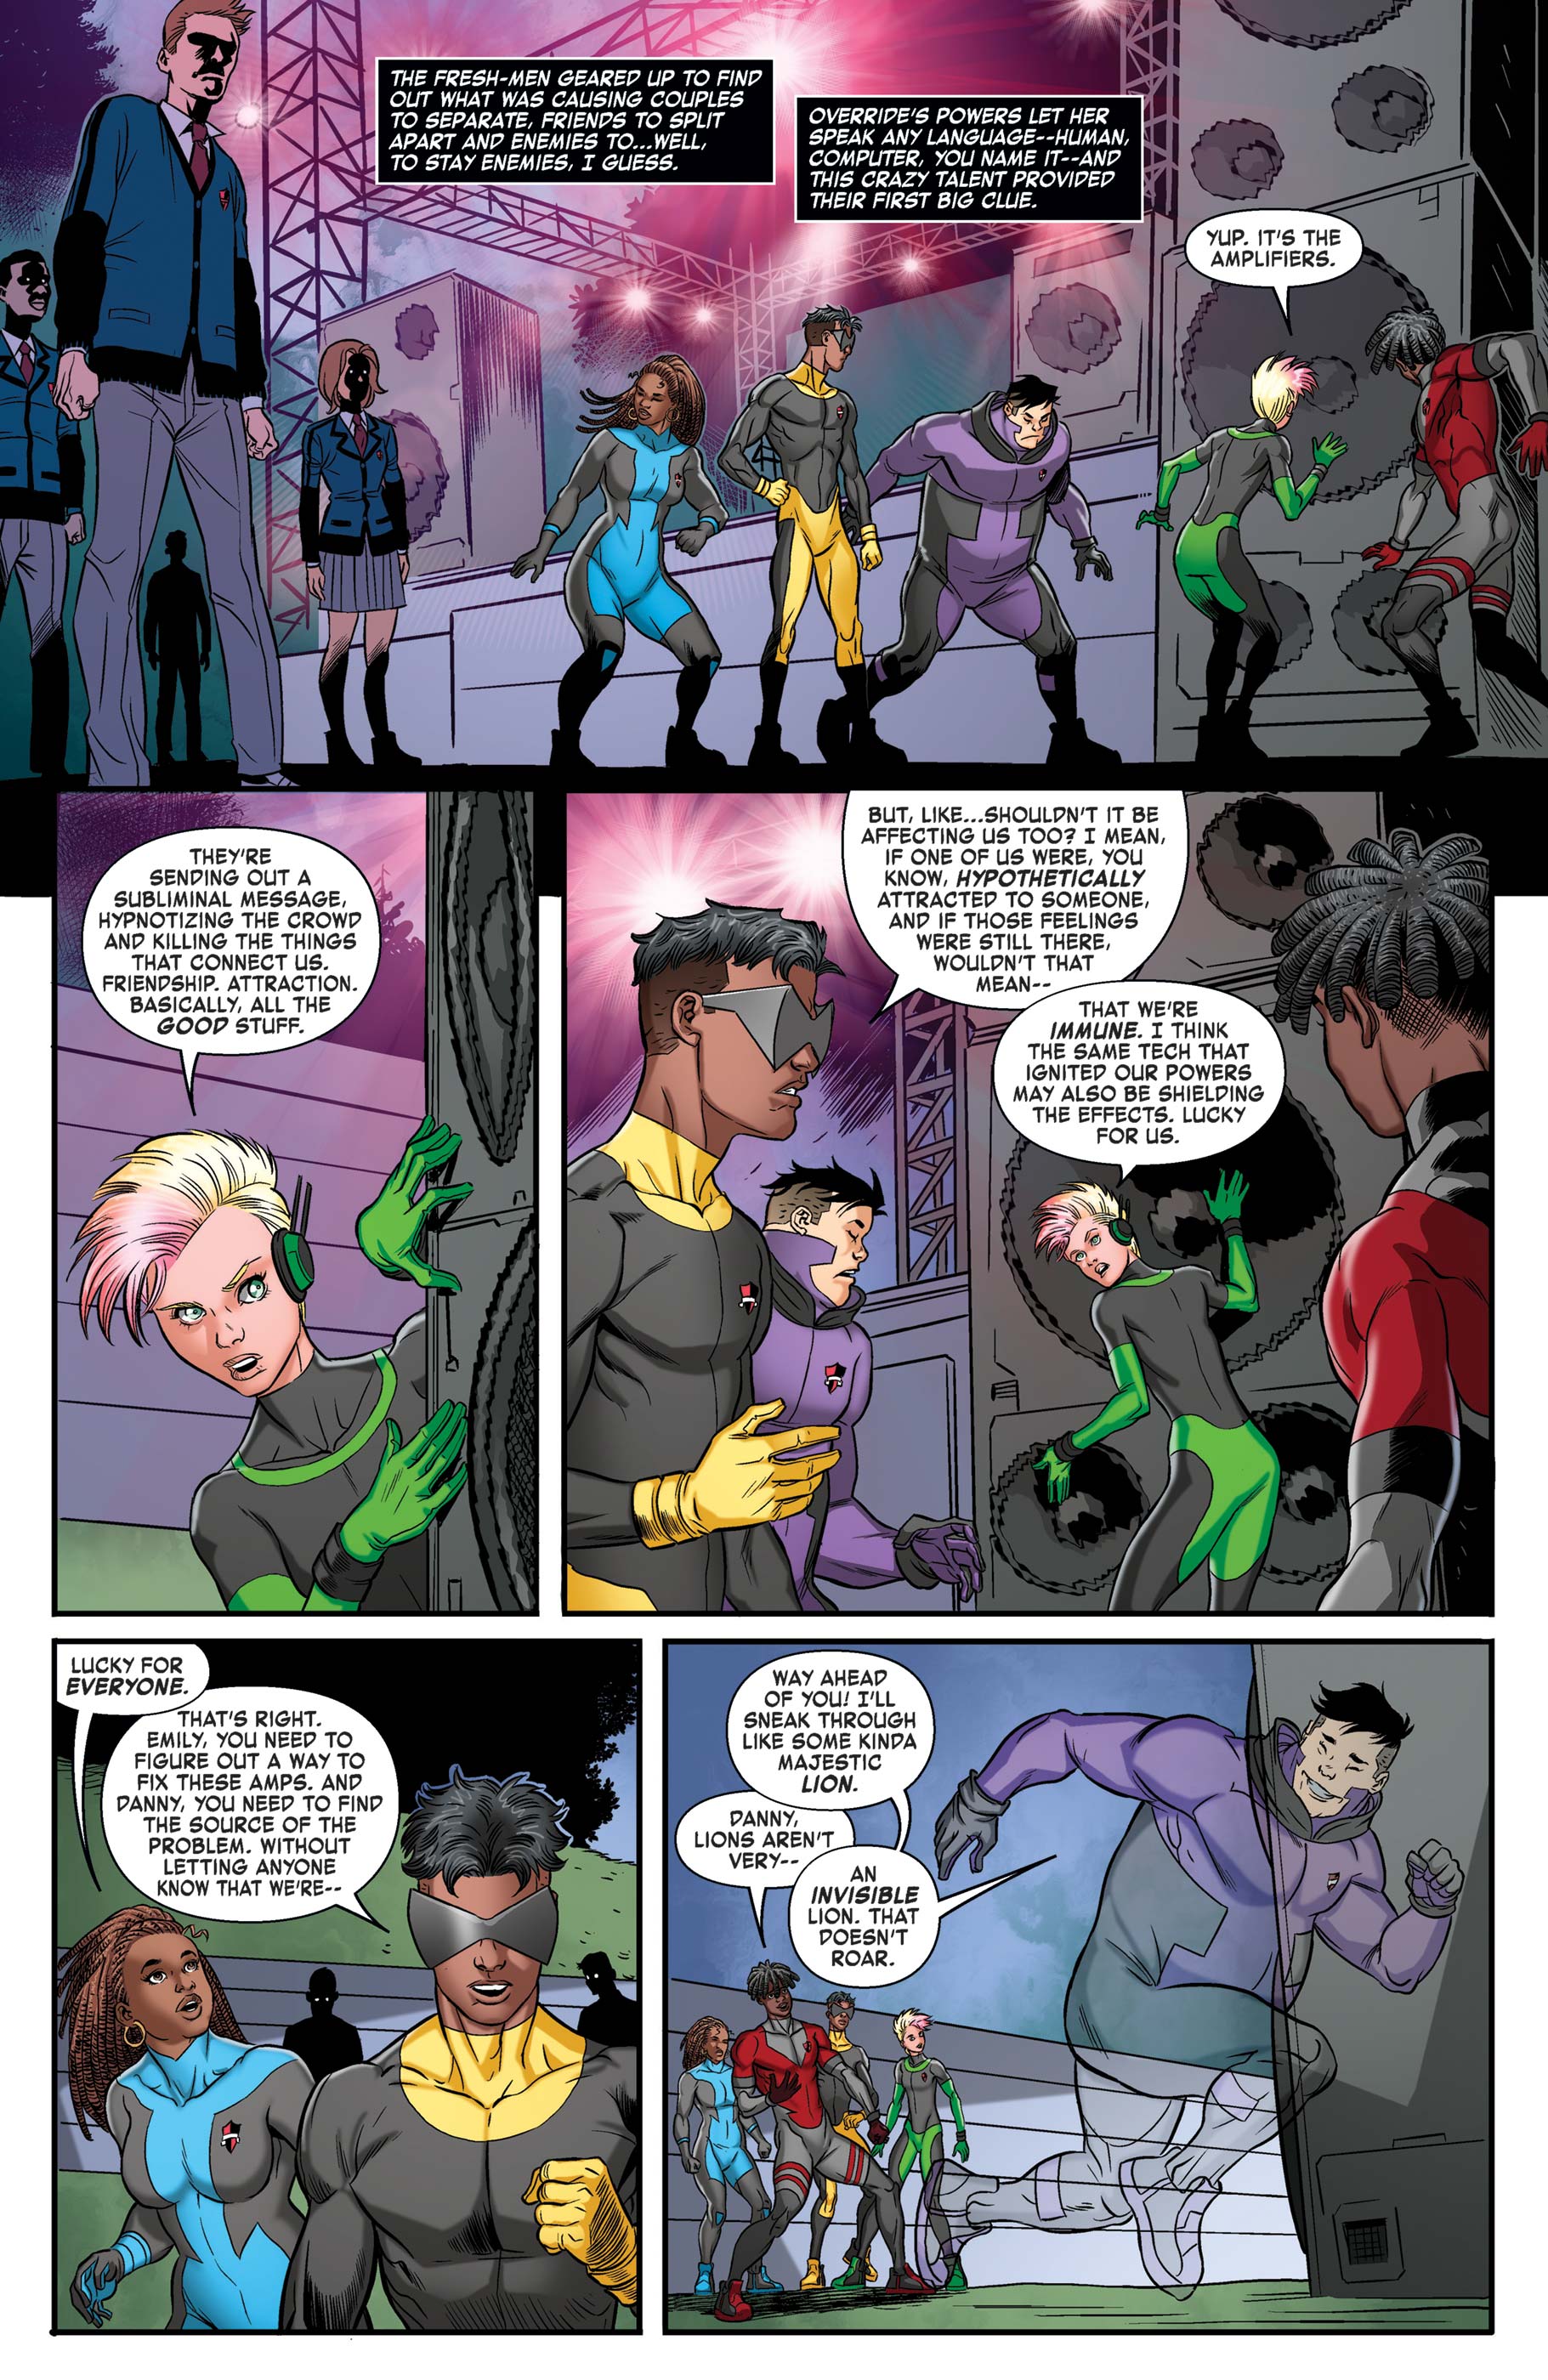 AXE: The Freshmen Issue Featuring The Avengers Full Page 6